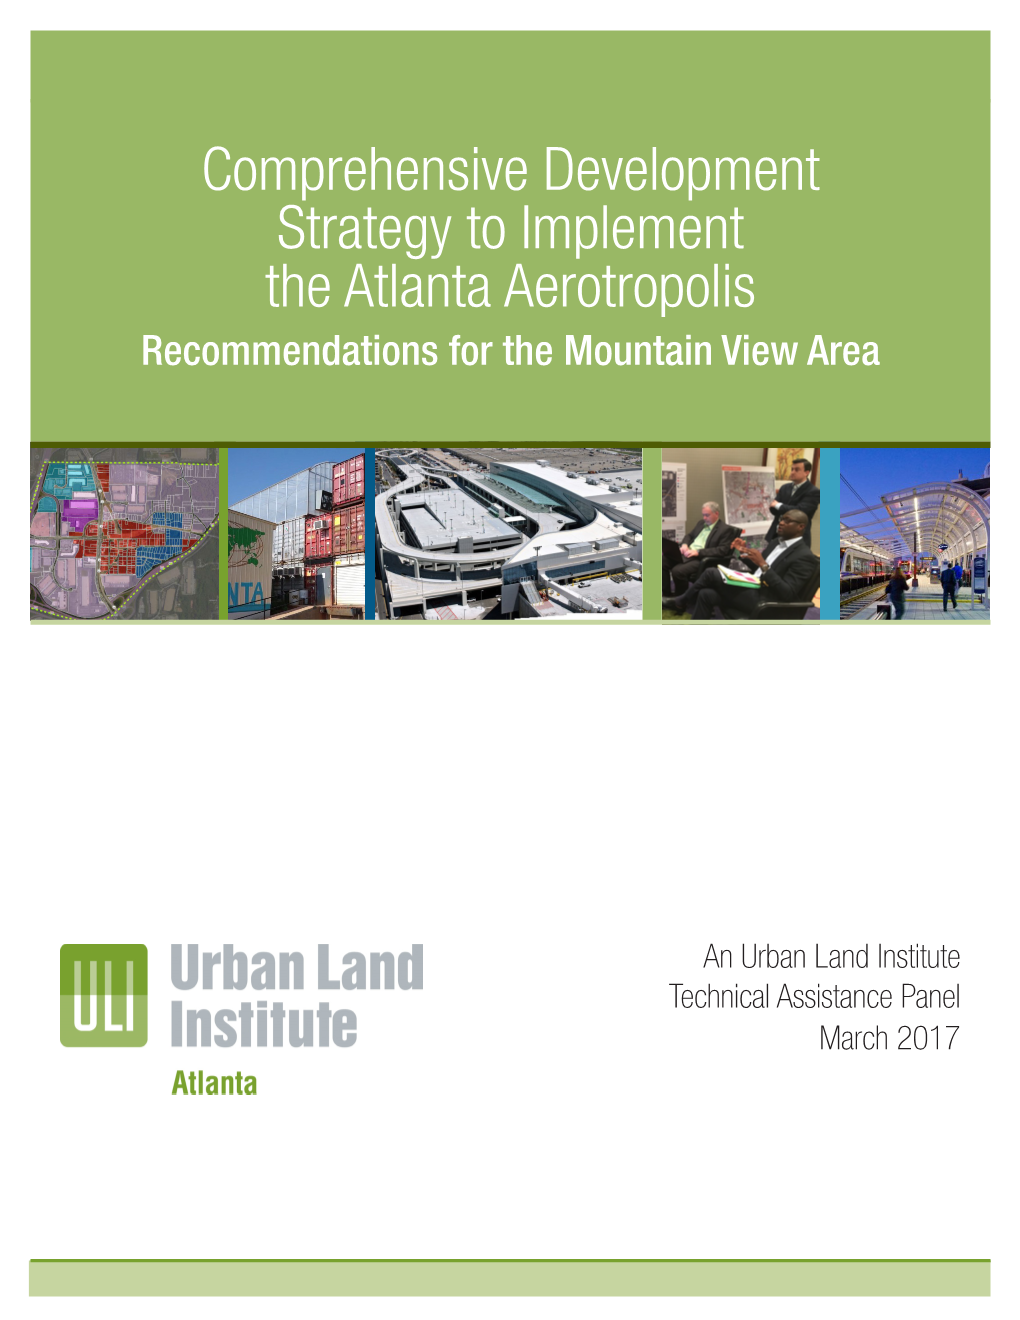 Comprehensive Development Strategy to Implement the Atlanta Aerotropolis Recommendations for the Mountain View Area